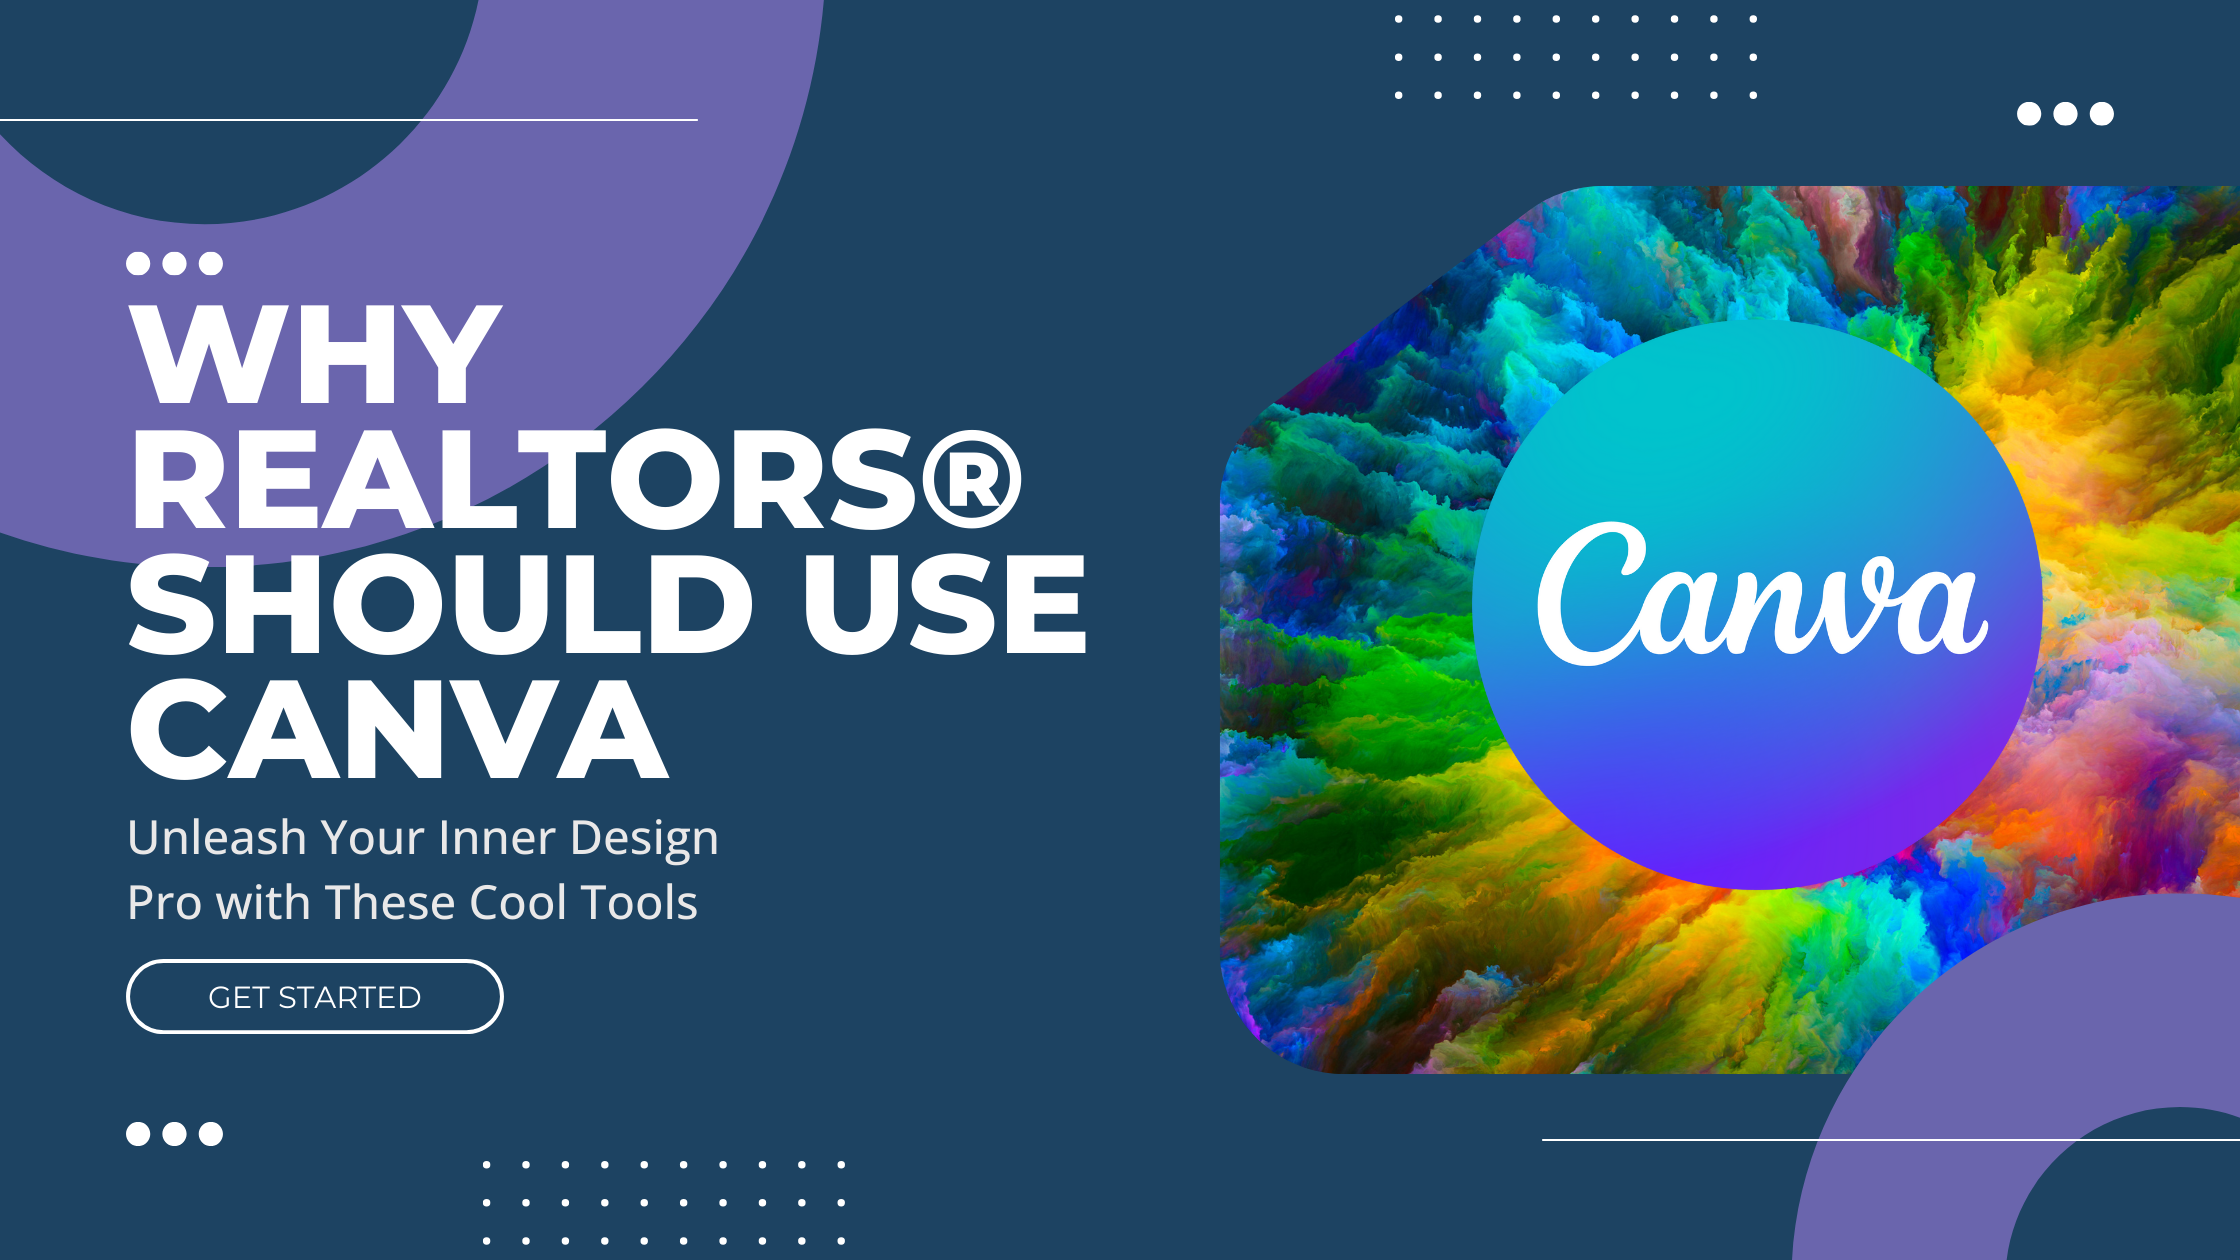 Why Realtors Should Use Canva: Unleash Your Inner Design Pro with These Cool Tools